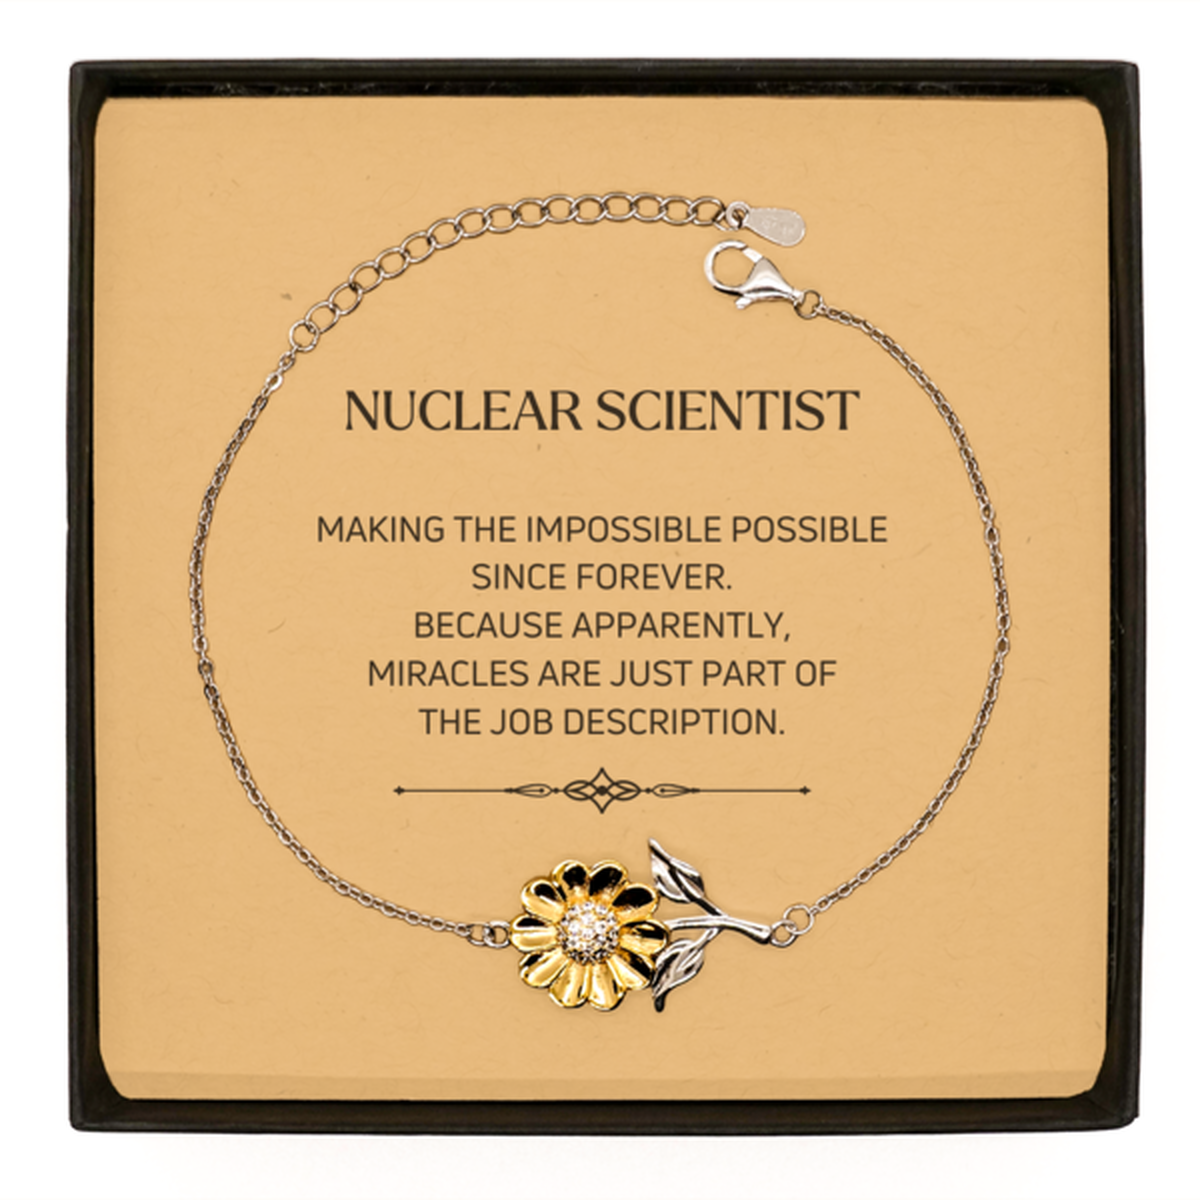 Funny Nuclear Scientist Gifts, Miracles are just part of the job description, Inspirational Birthday Sunflower Bracelet For Nuclear Scientist, Men, Women, Coworkers, Friends, Boss